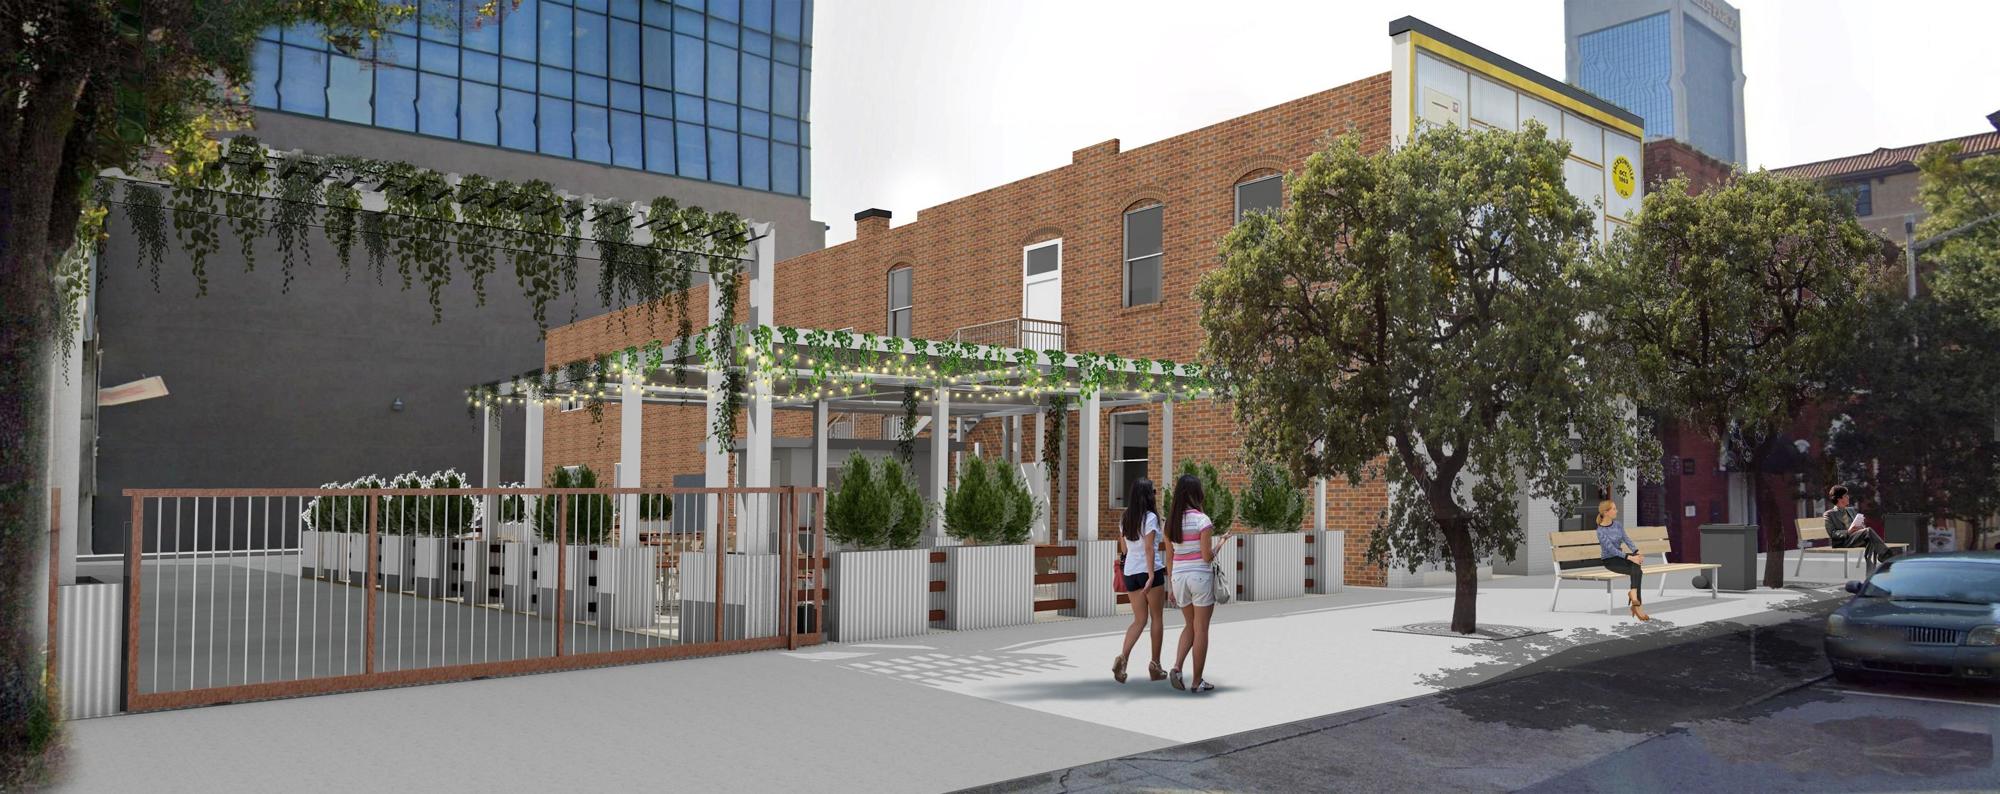 A rendering of Ruby Beach Brewing Co. from along the street.